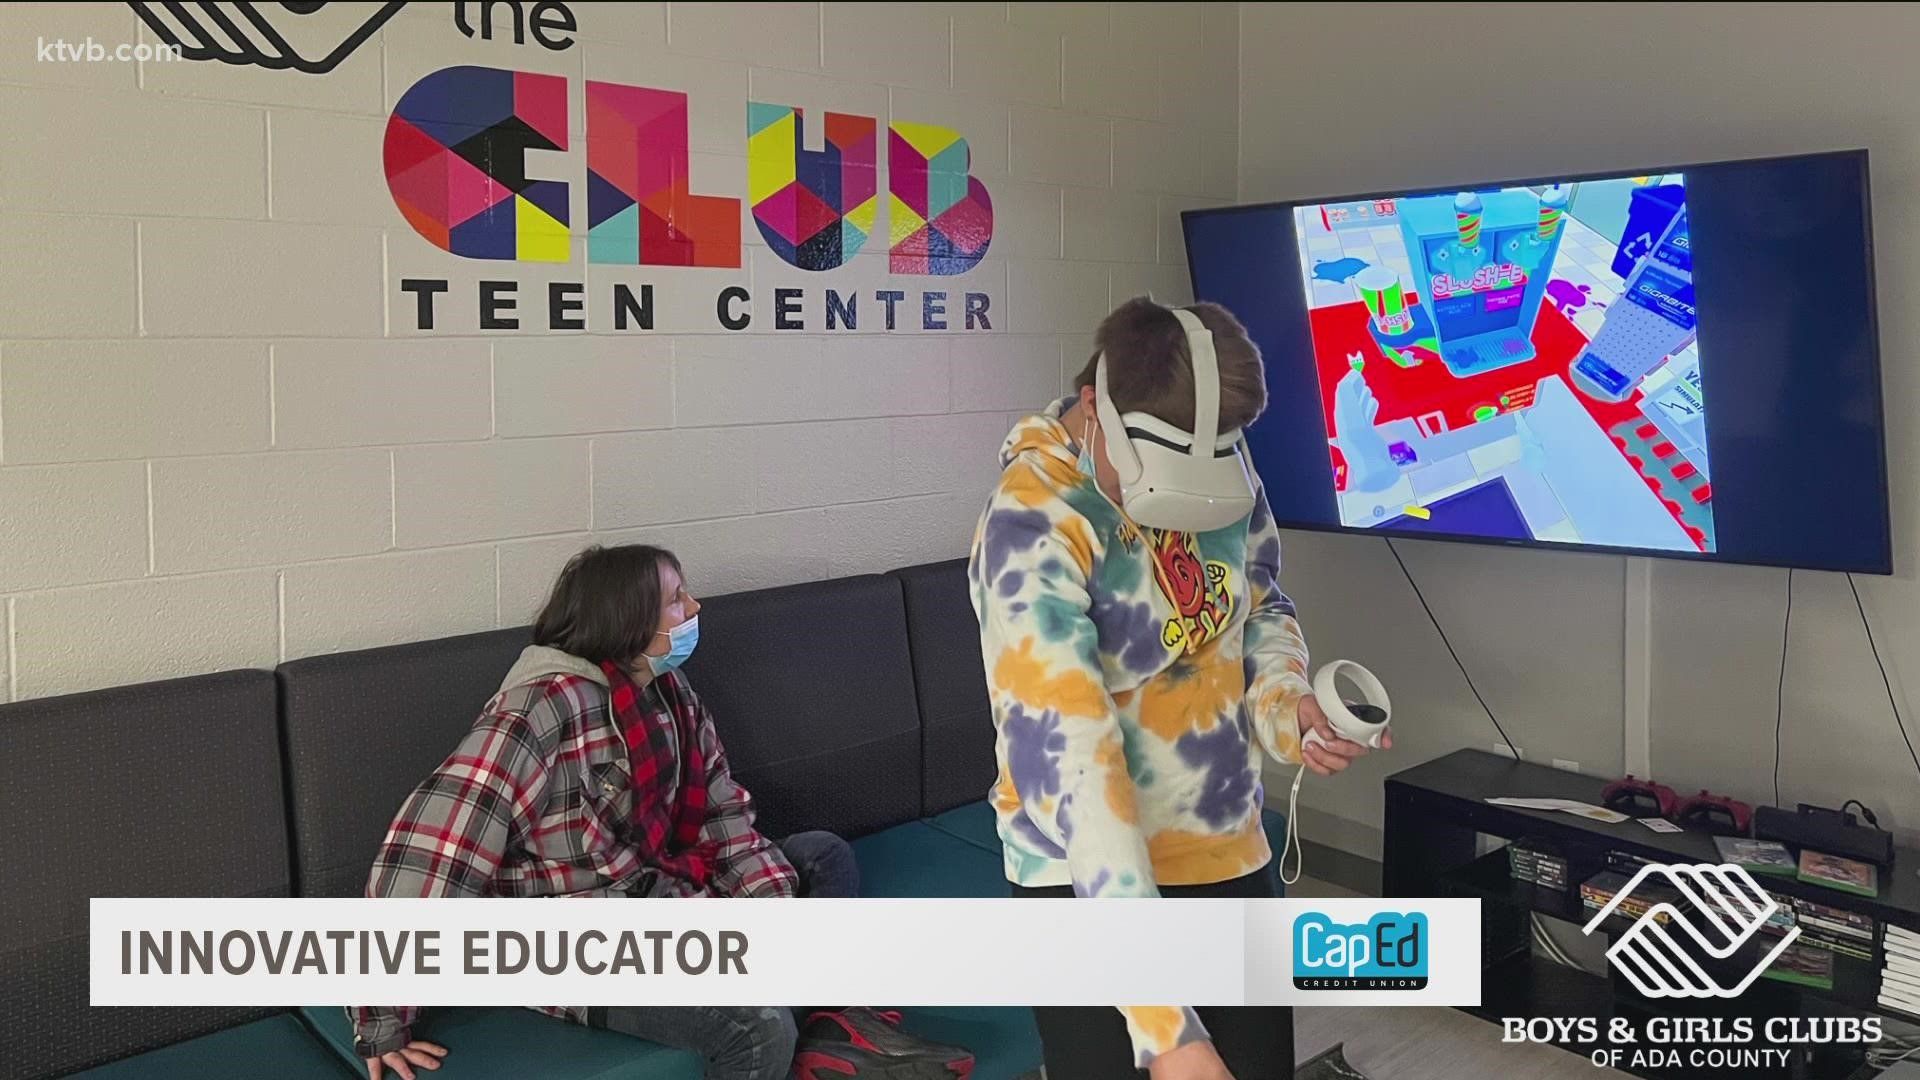 From a virtual-reality spacewalk to exploring behind the scenes at the zoo, there is plenty of adventures to be had at the Boys and Girls Club.